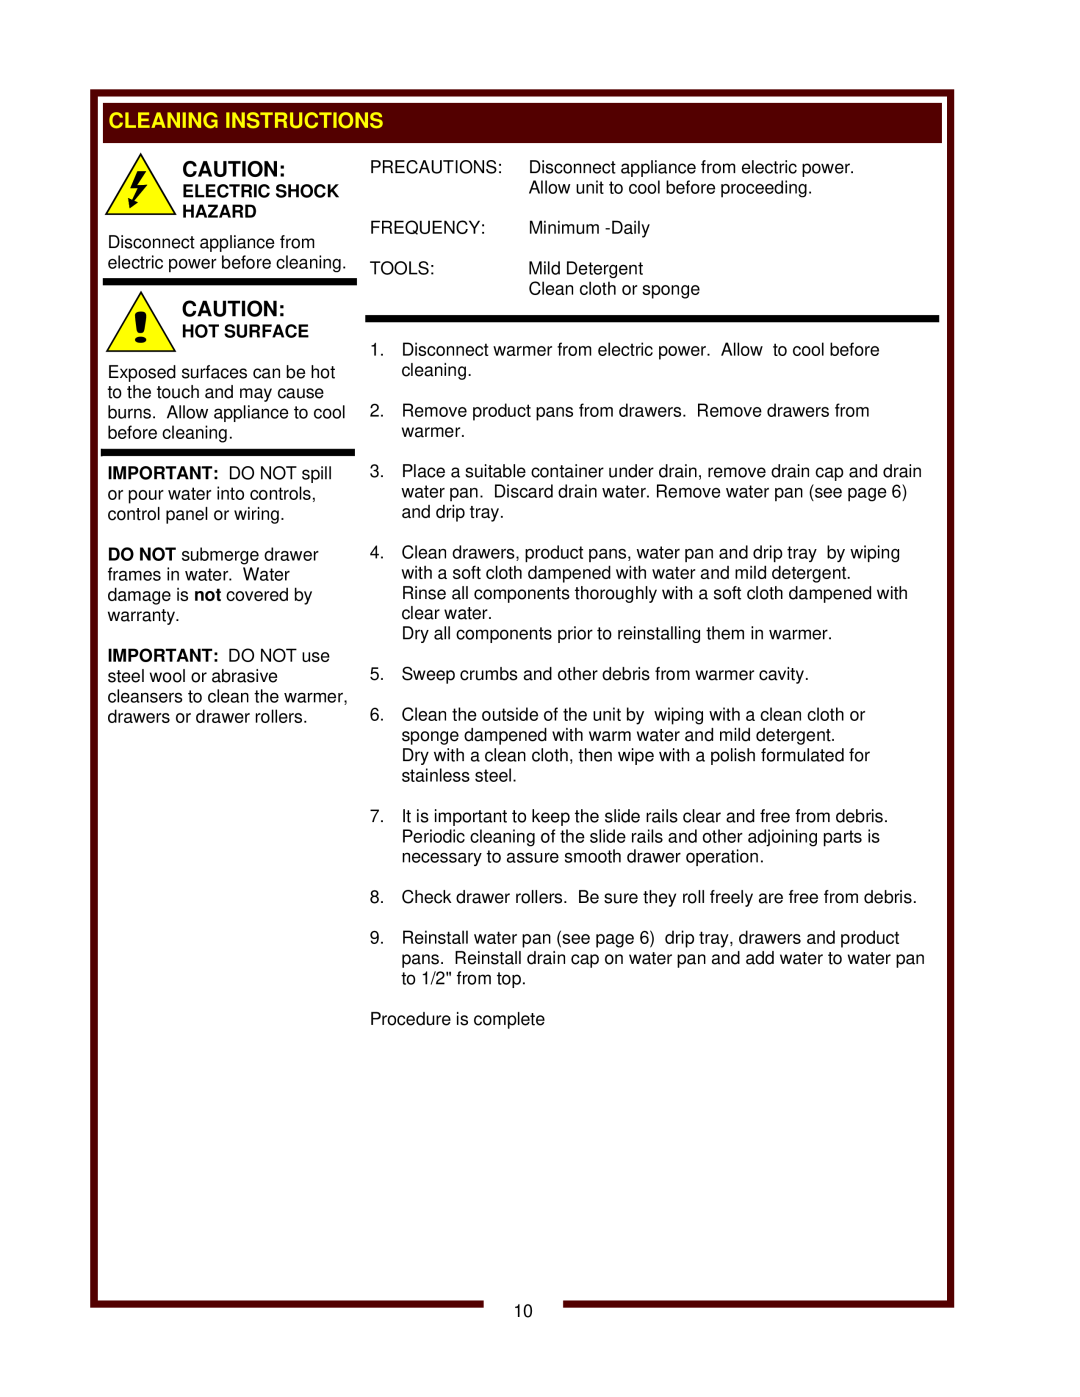 Wells HDW-2 operation manual Electric Shock Hazard, Disconnect appliance from electric power before cleaning, Hot Surface 